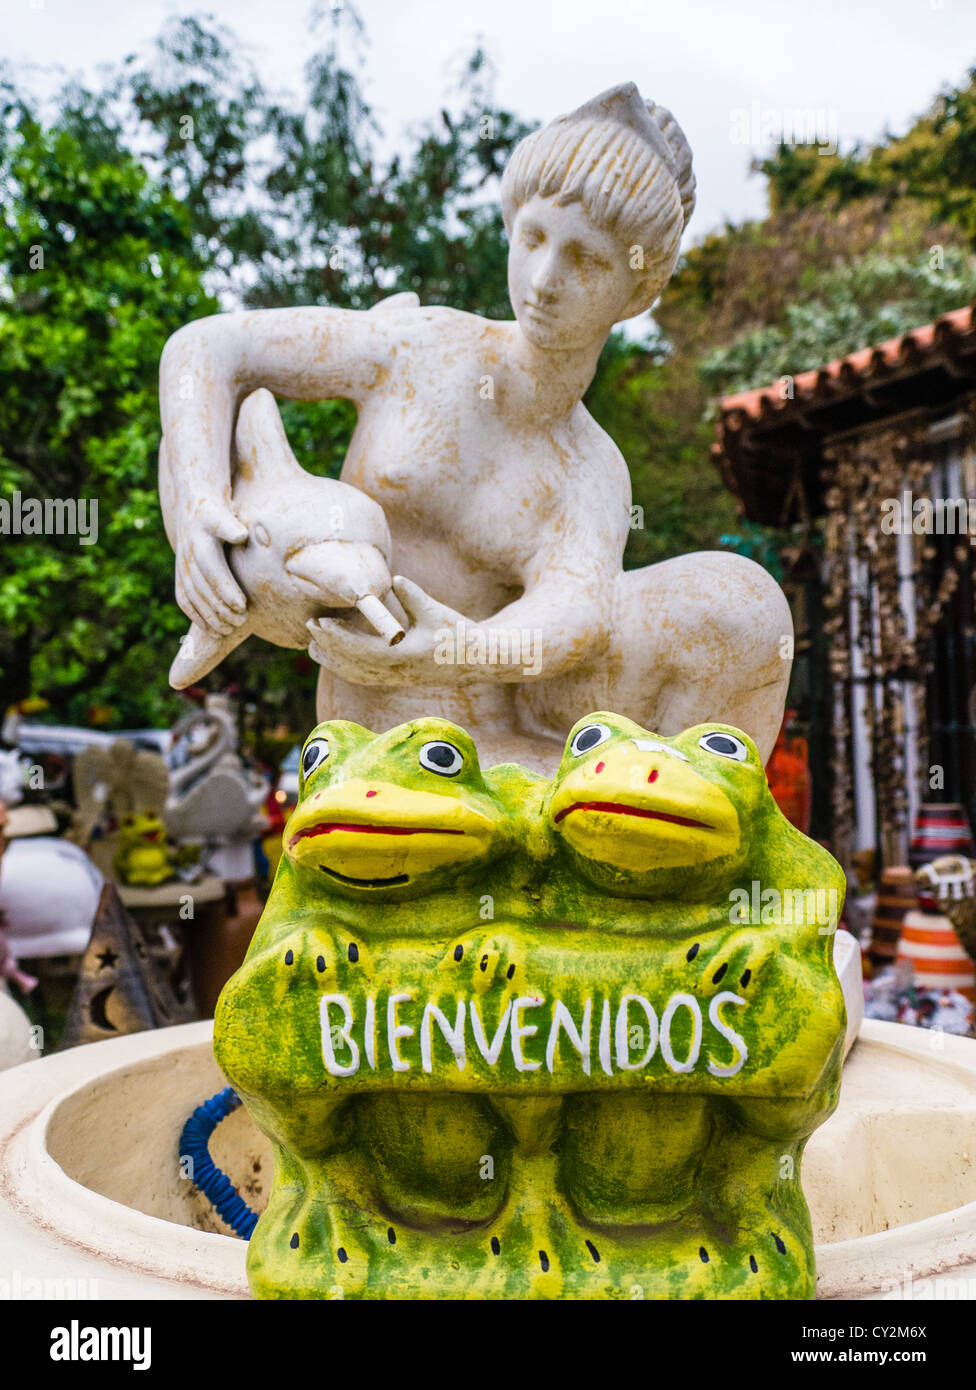 Kitsch lawn art in form of a woman figurine holding dolphin and two frogs for sale at a street market in Asunción Paraguay. Stock Photo